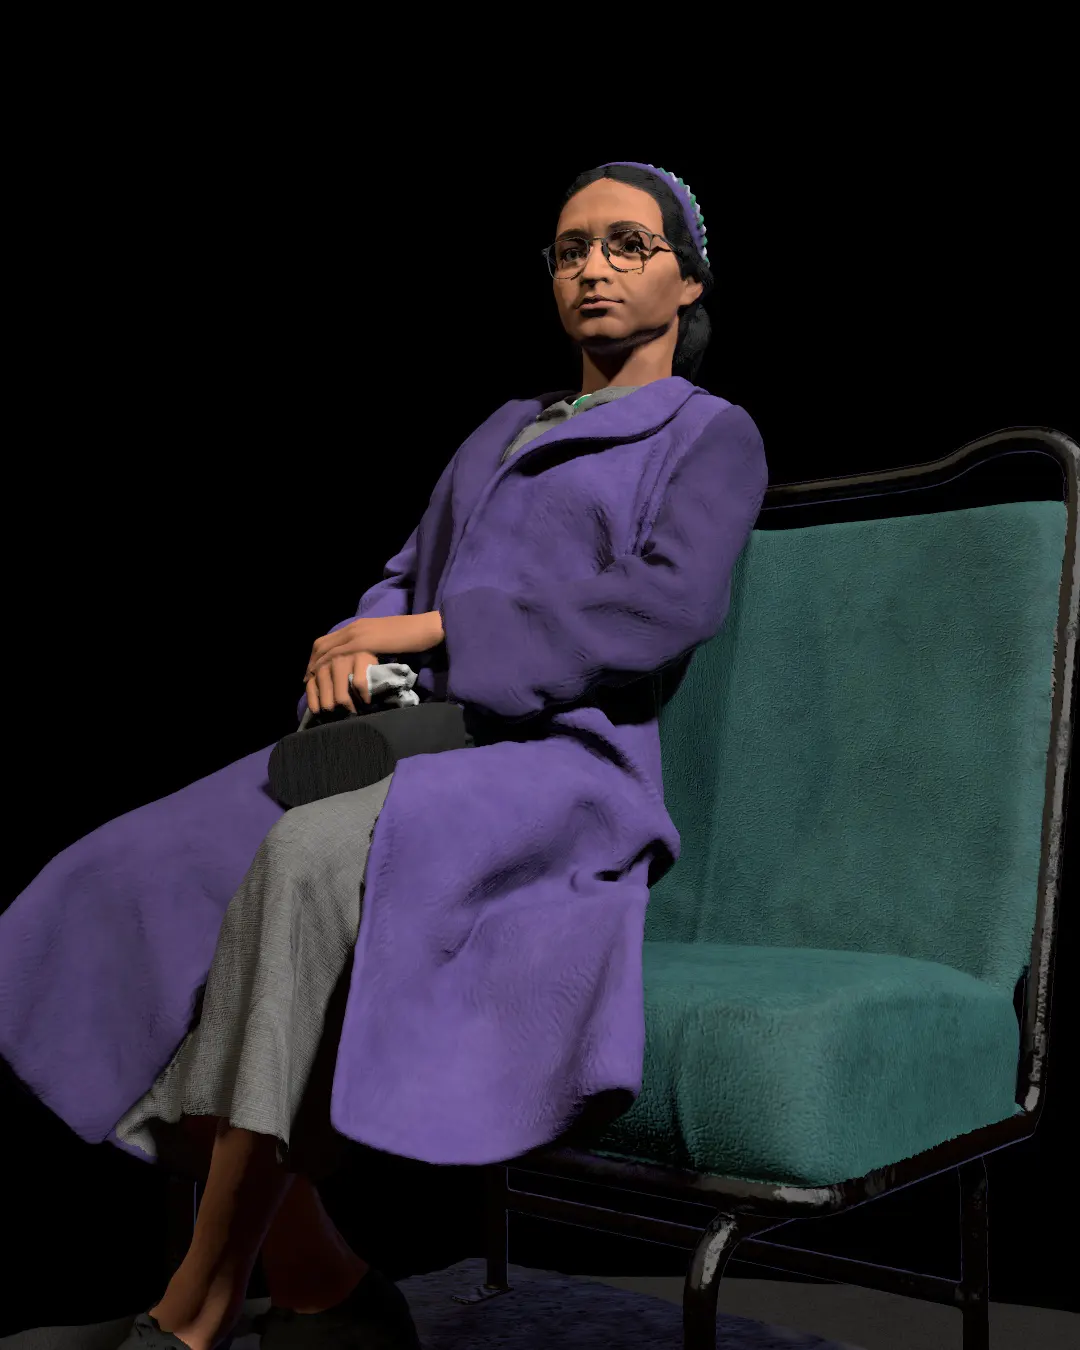 Rosa-Parks-statue/Rendering-of-Rosa-Parks-statue-modeled-by-Emil-Sole-6.webp